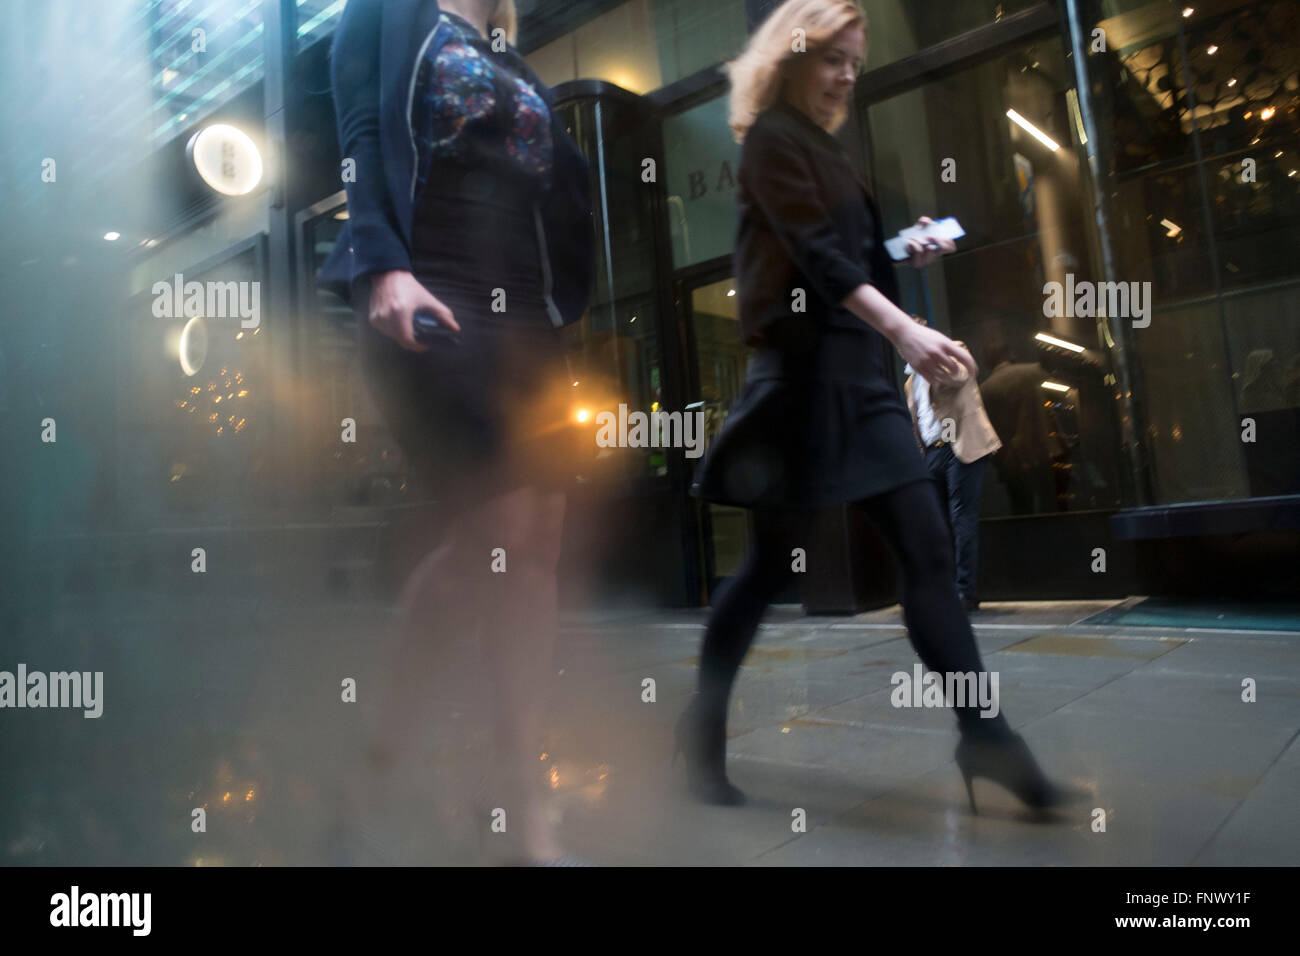 People out and about in the rain in the City of London, England, UK. January in the UK sees wet and cold weather, almost like a dreary scene from days gone by. Stock Photo